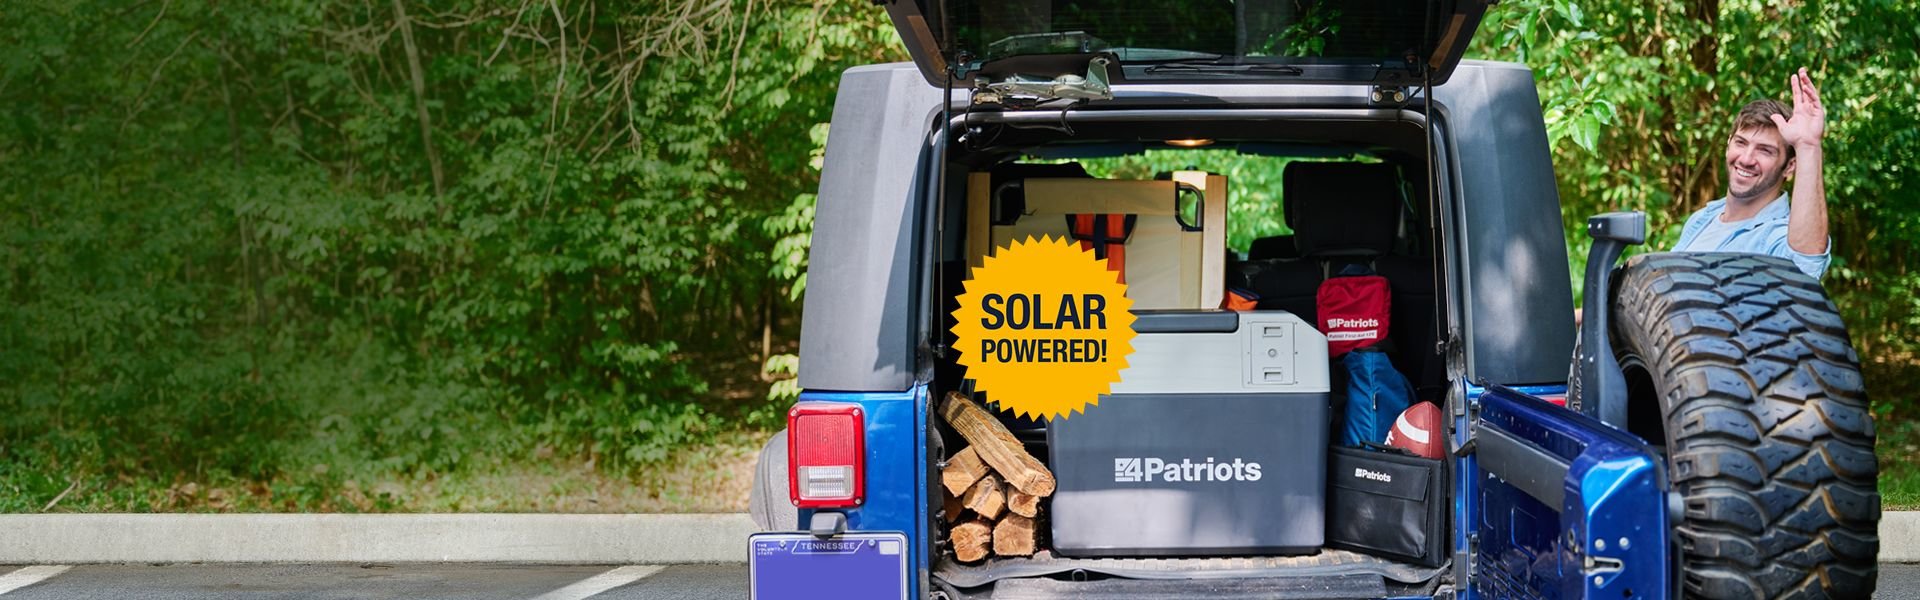 Man getting ready to start tailgating with his trunk open, Solar Go-Fridge and football ready to watch the game.